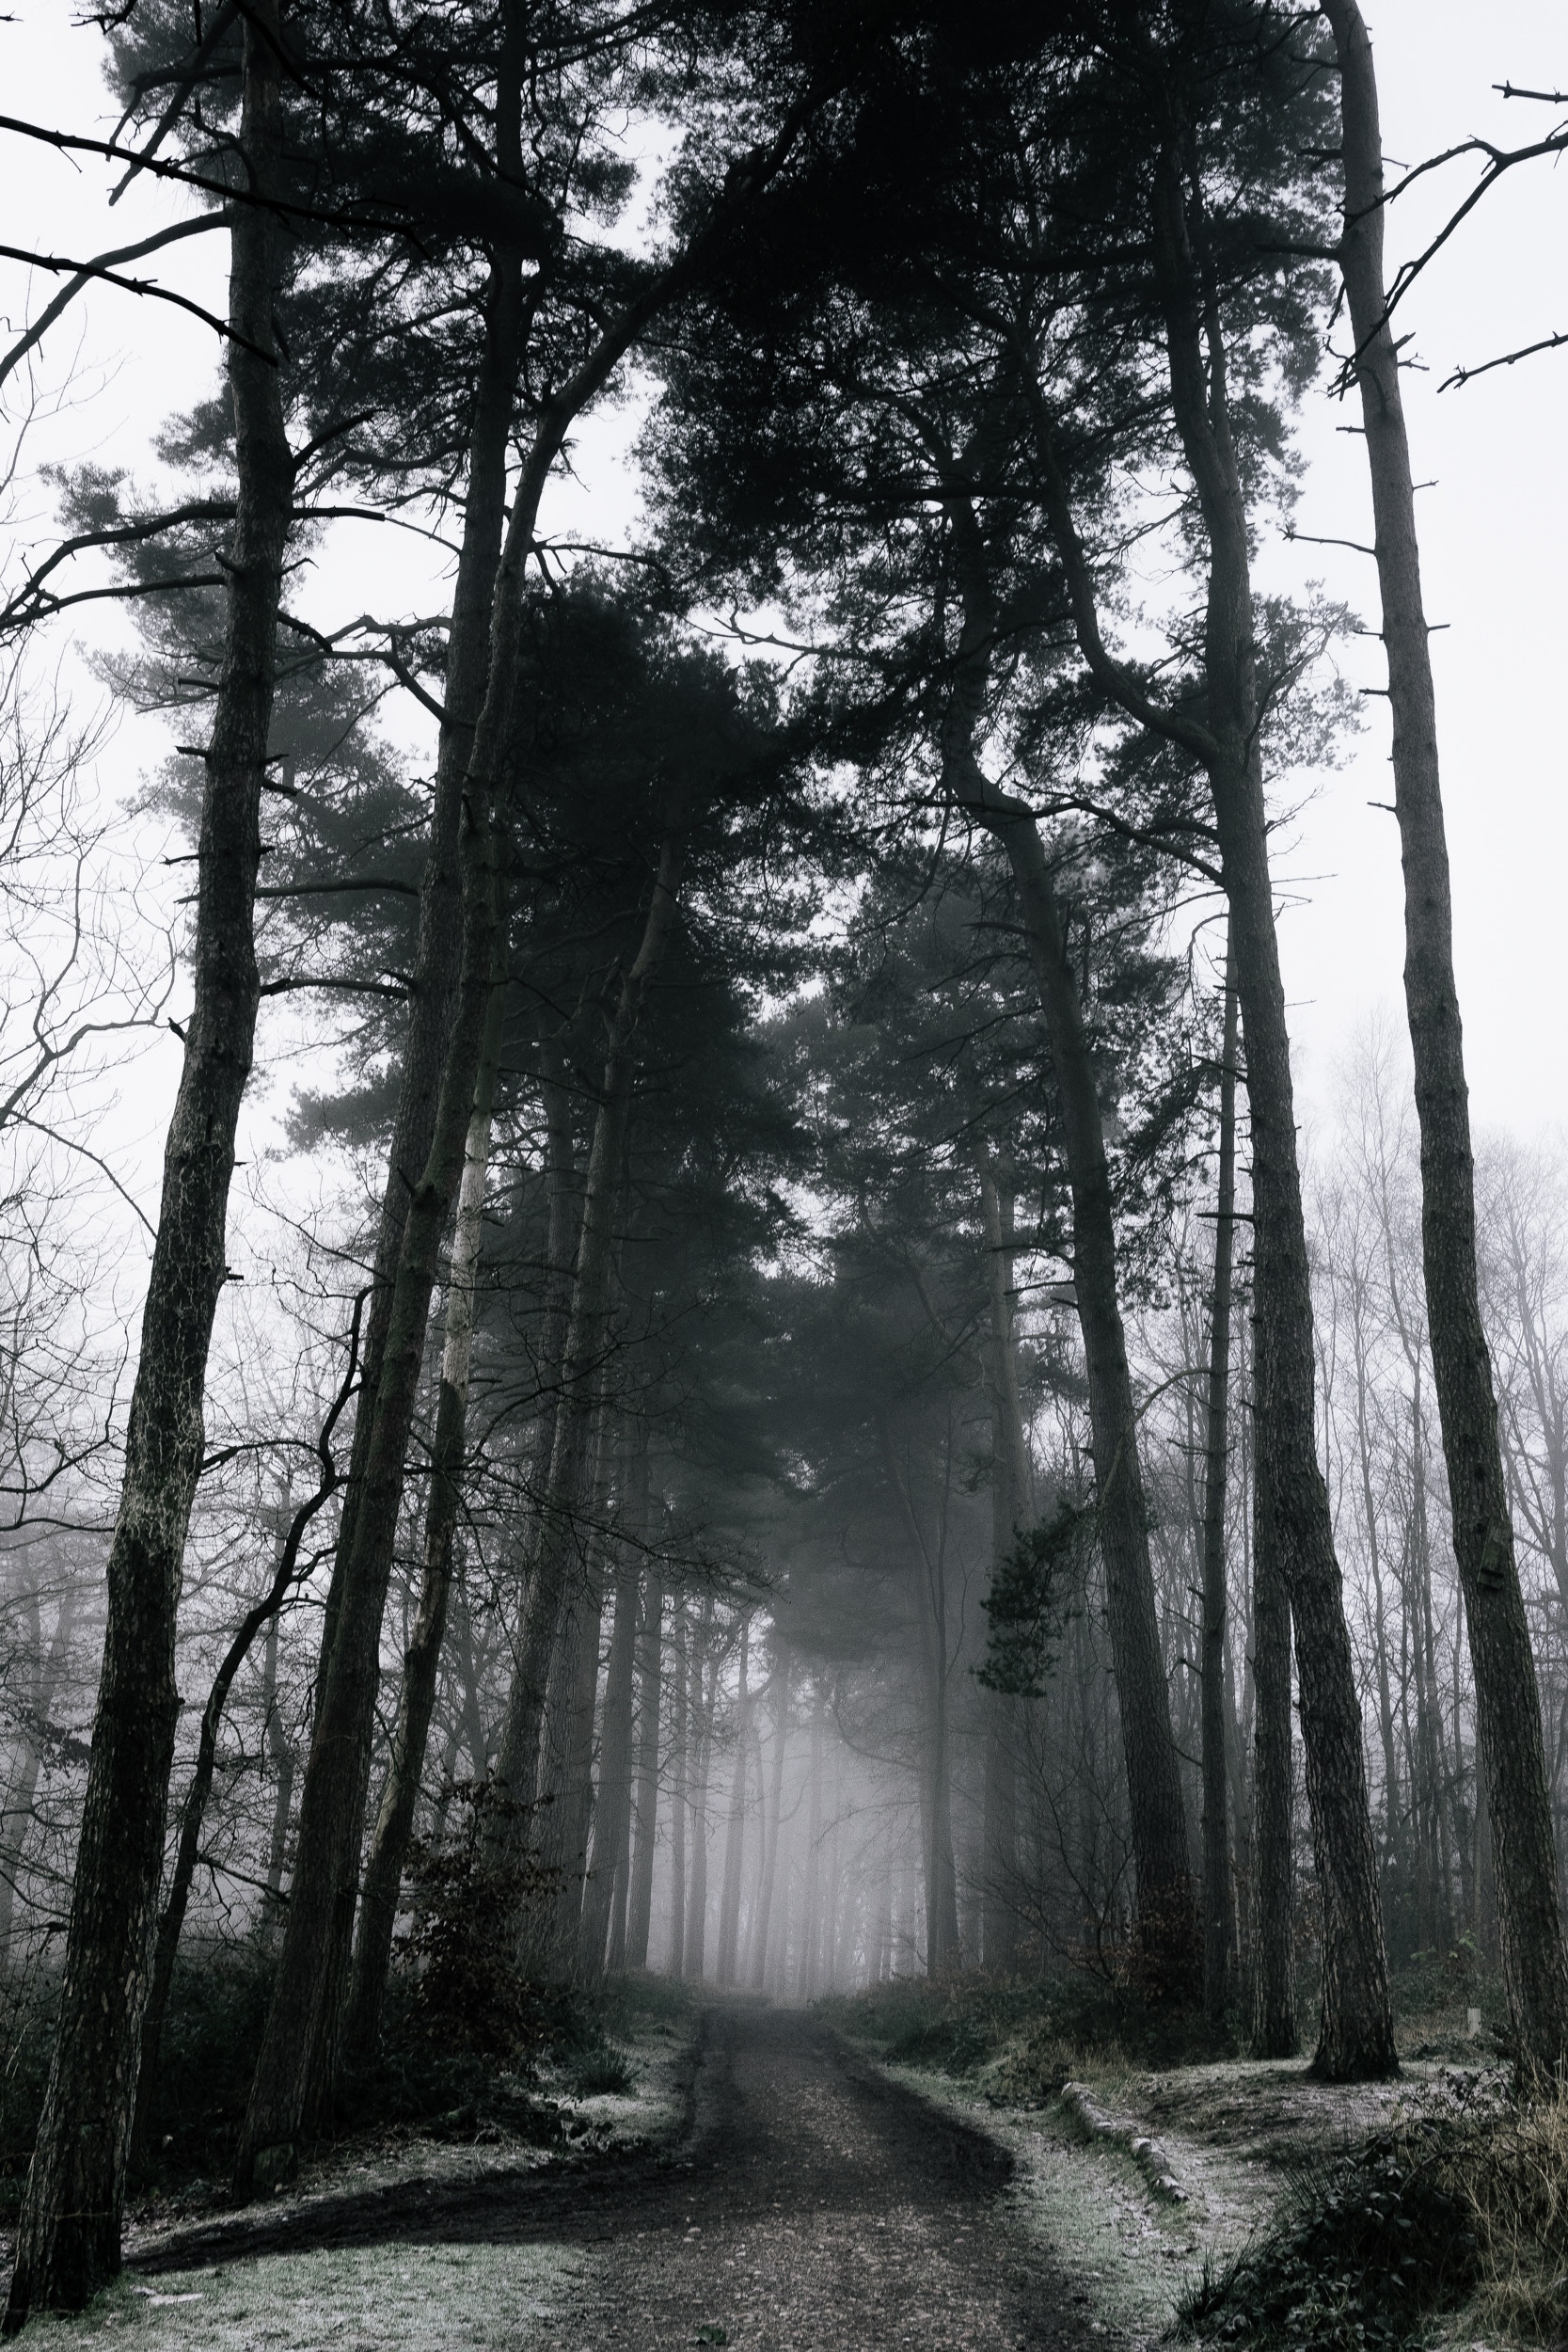 gloomy, gloomily, nature, trees, fog, winter, snow, forest, branches